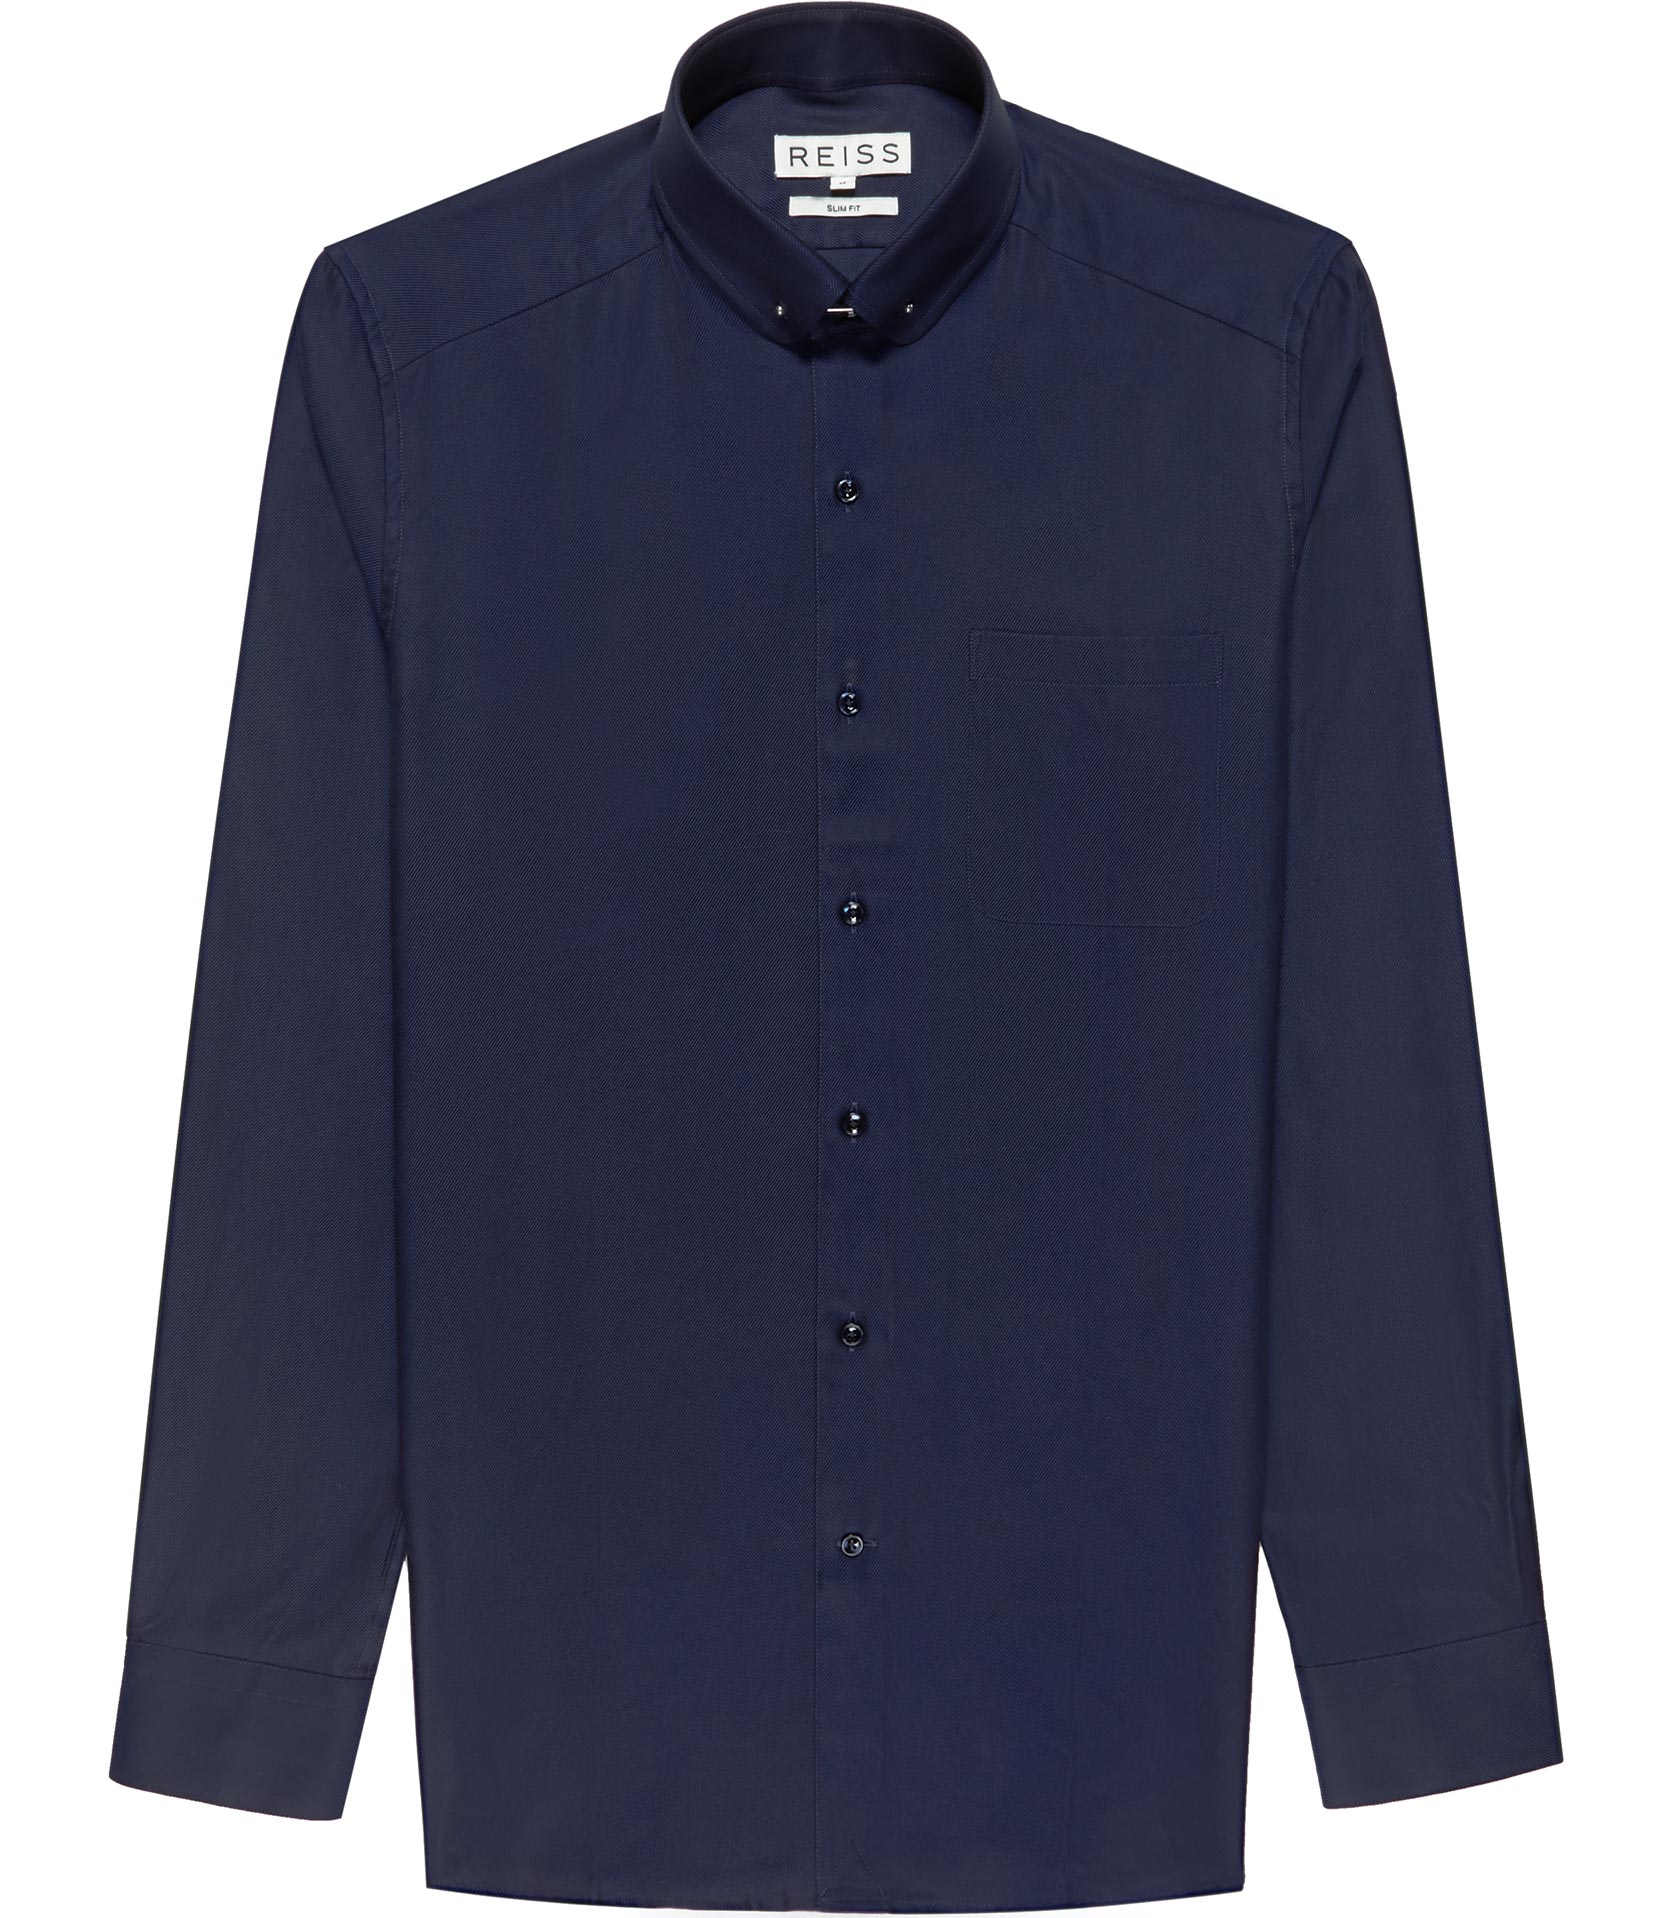 Lyst - Reiss Keaton Shirt with Collar Bar in Blue for Men